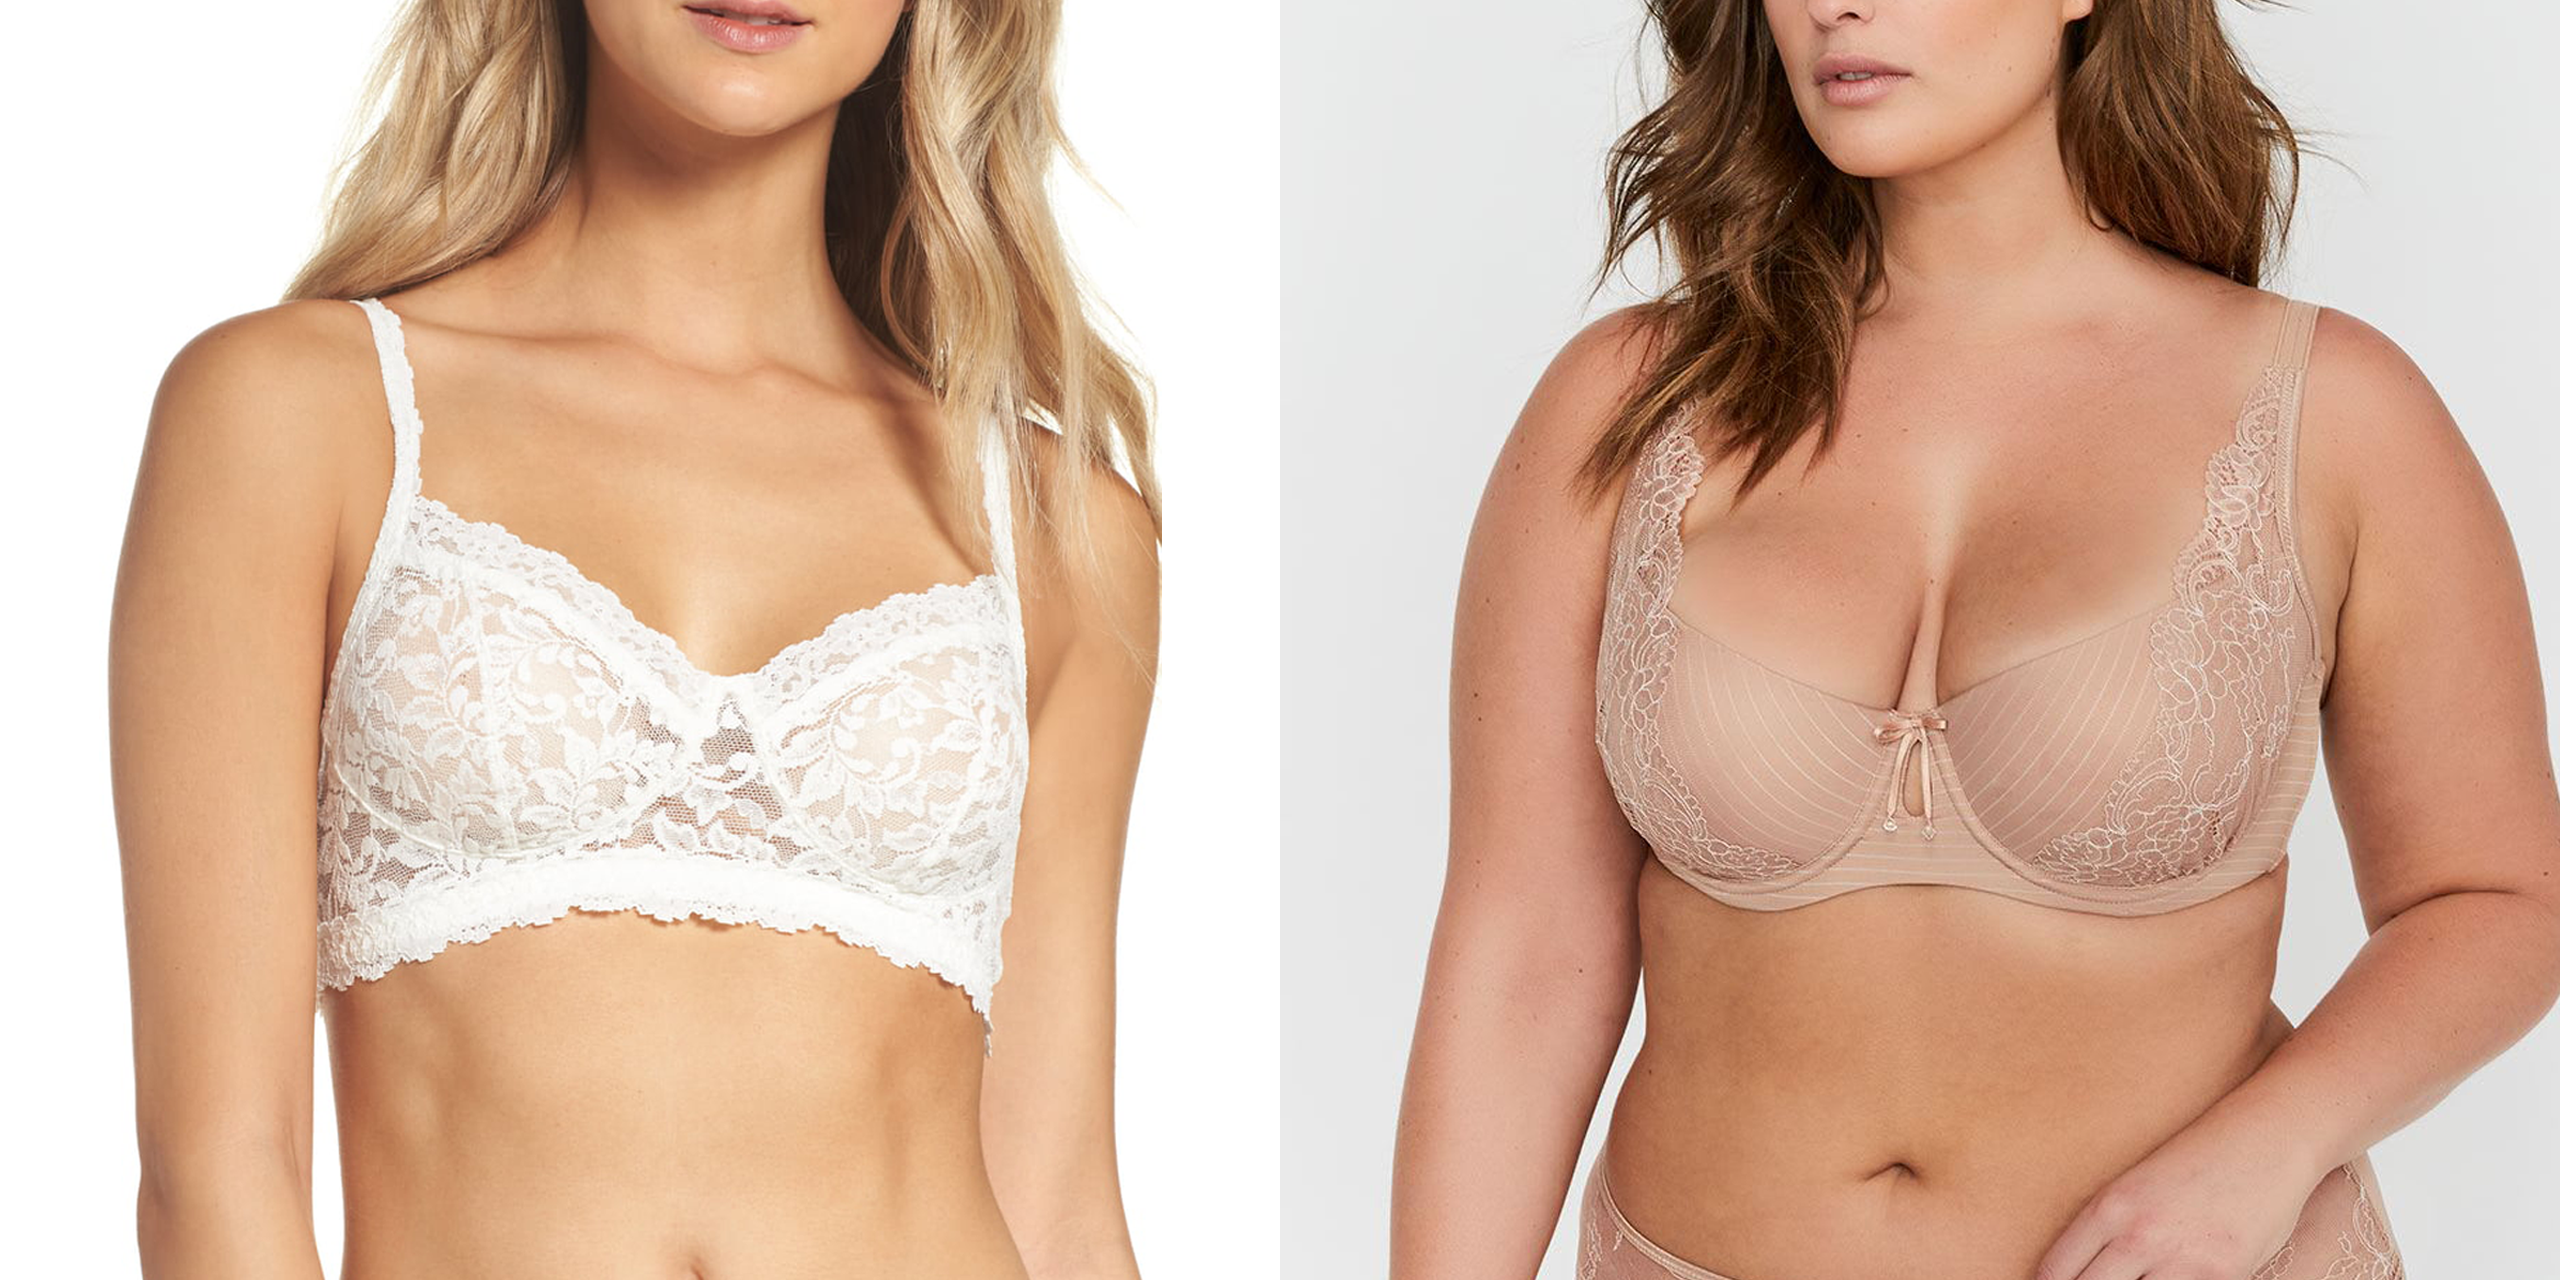 7 Best Bra Brands for Every Woman - Top ...